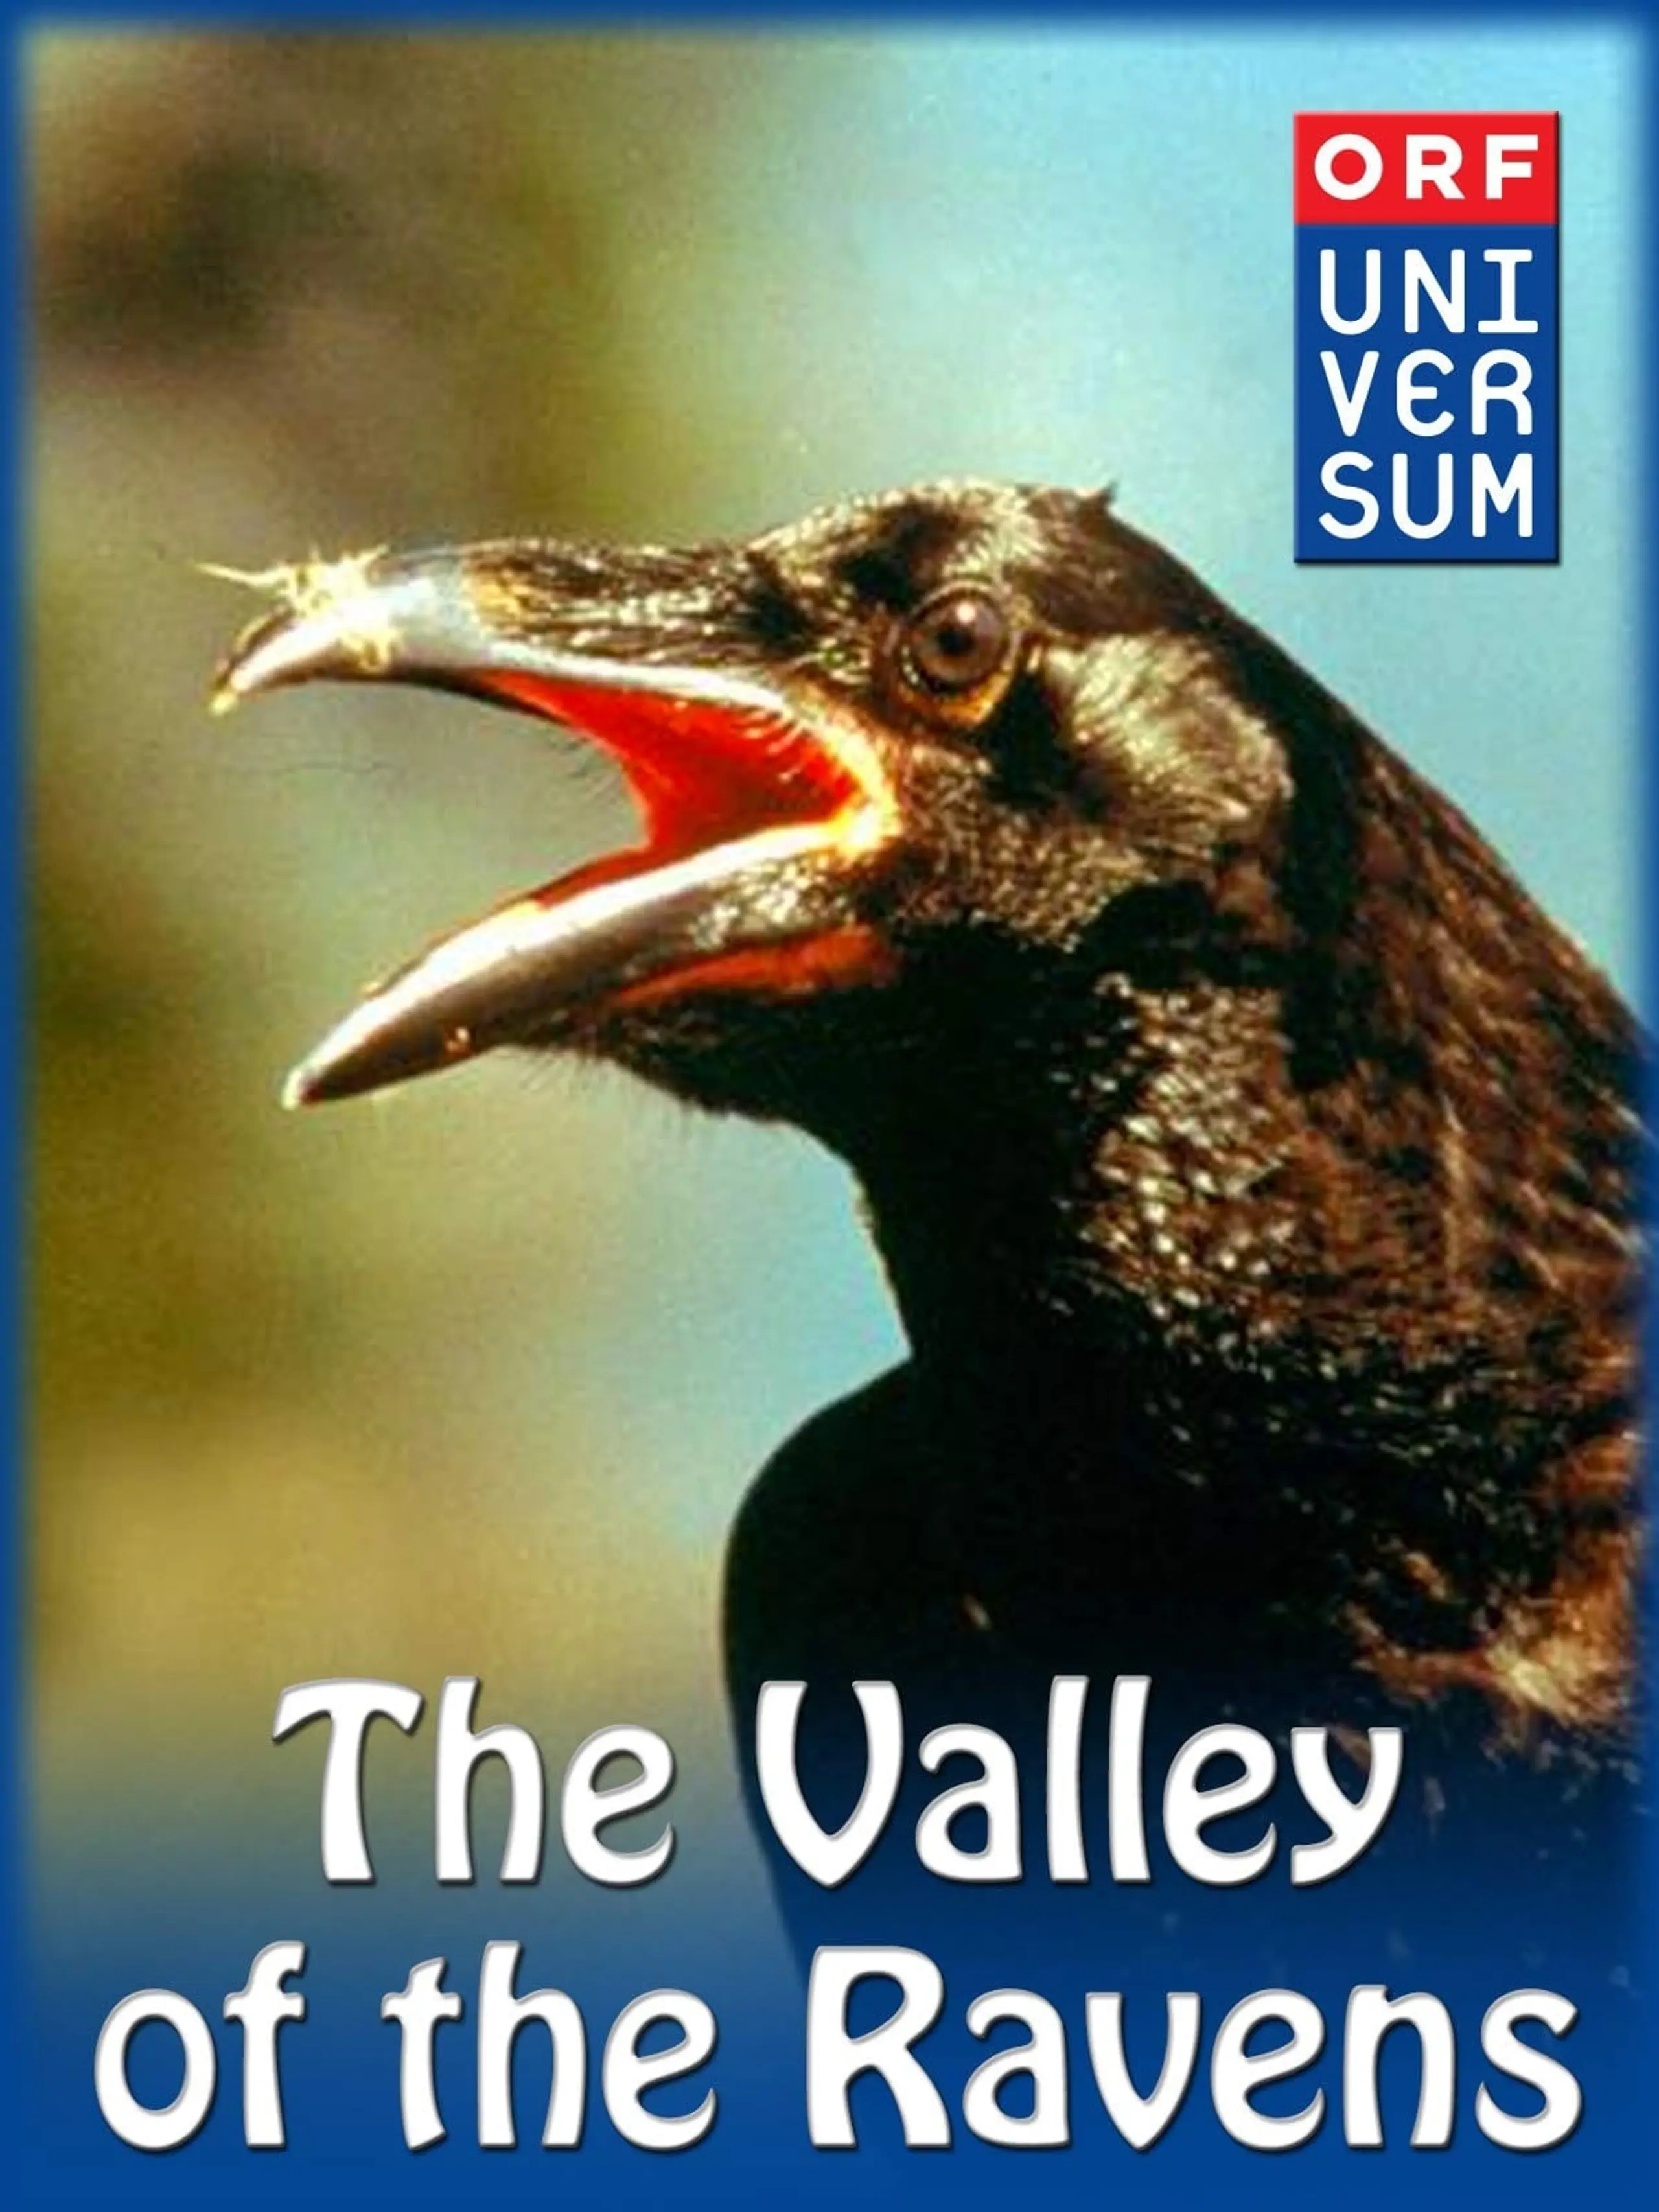 Valley of the Ravens